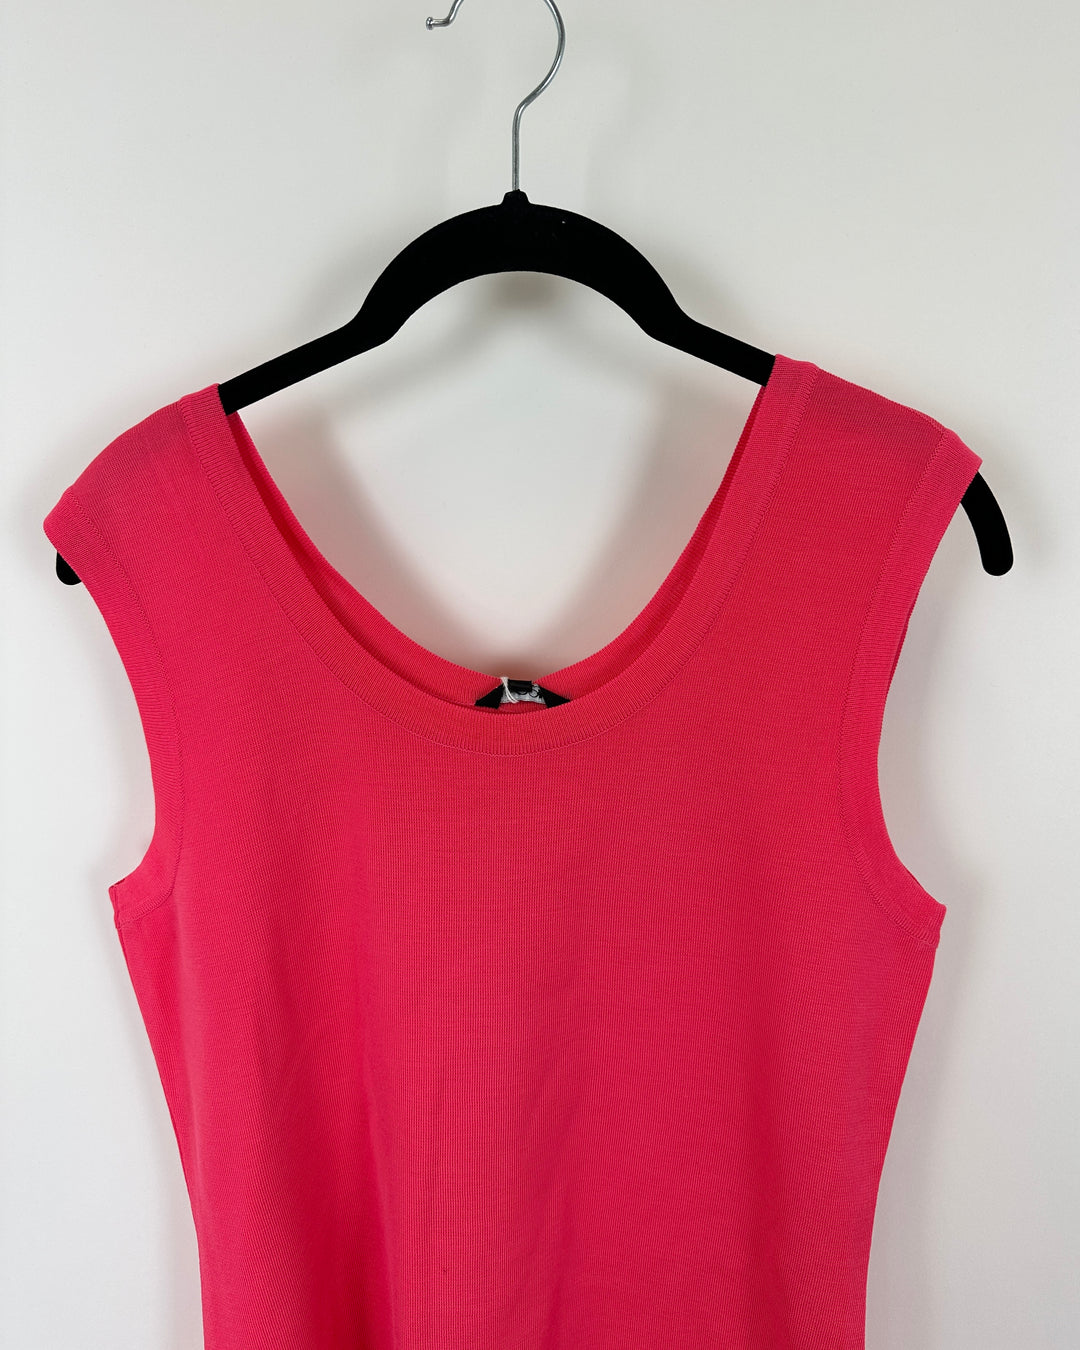 Bright Pink Knit Tank Top - Size 2/4 and 14/16